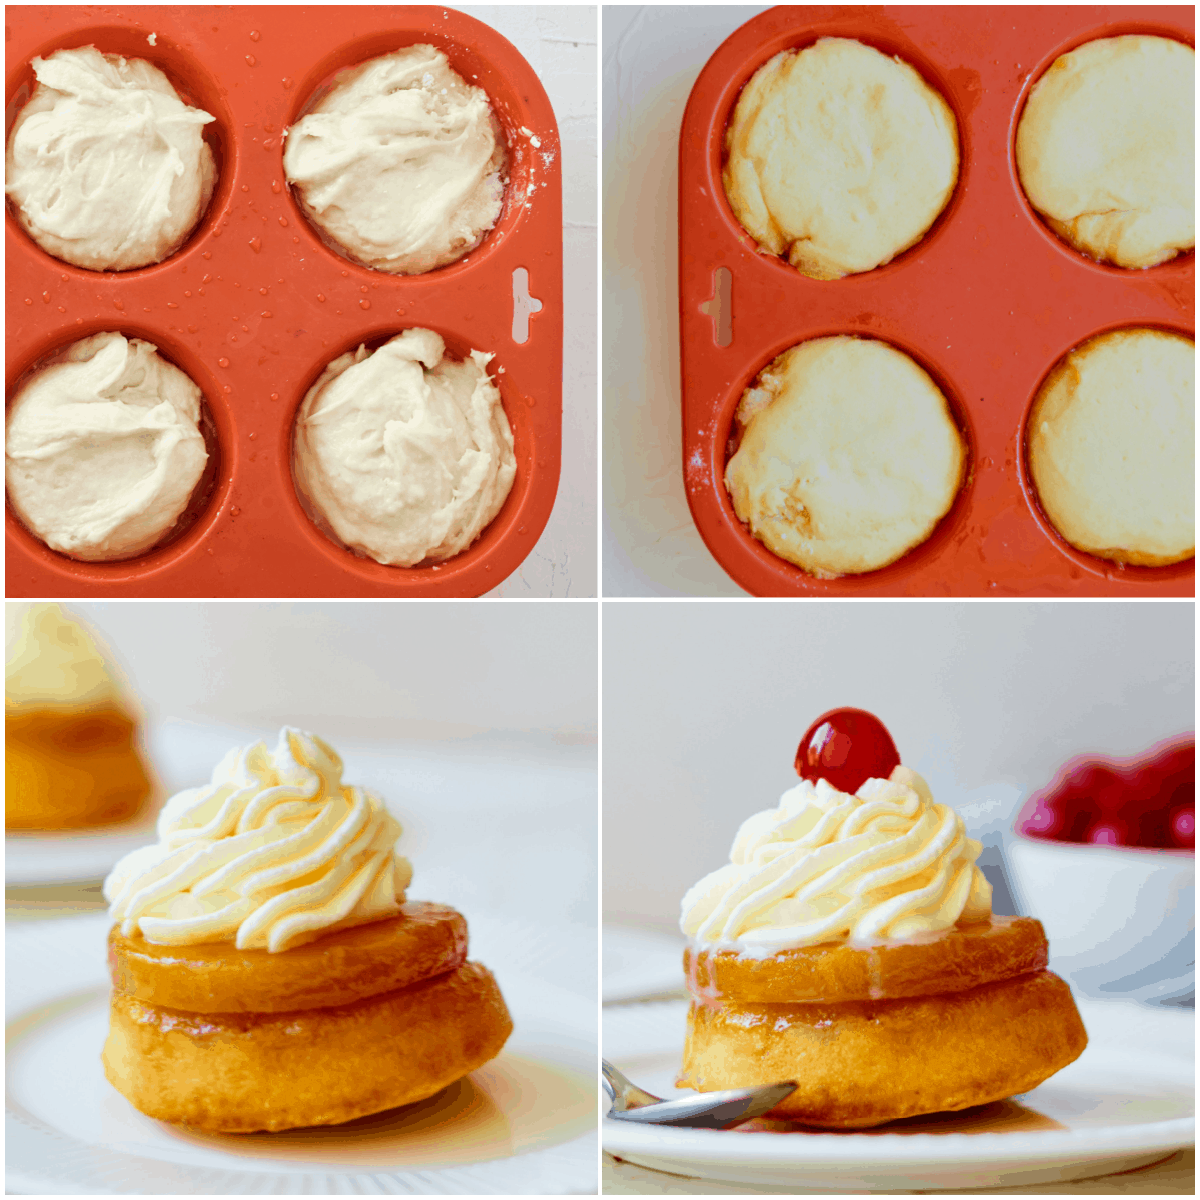 image collage showing the final steps for making pineapple upside down cupcakes